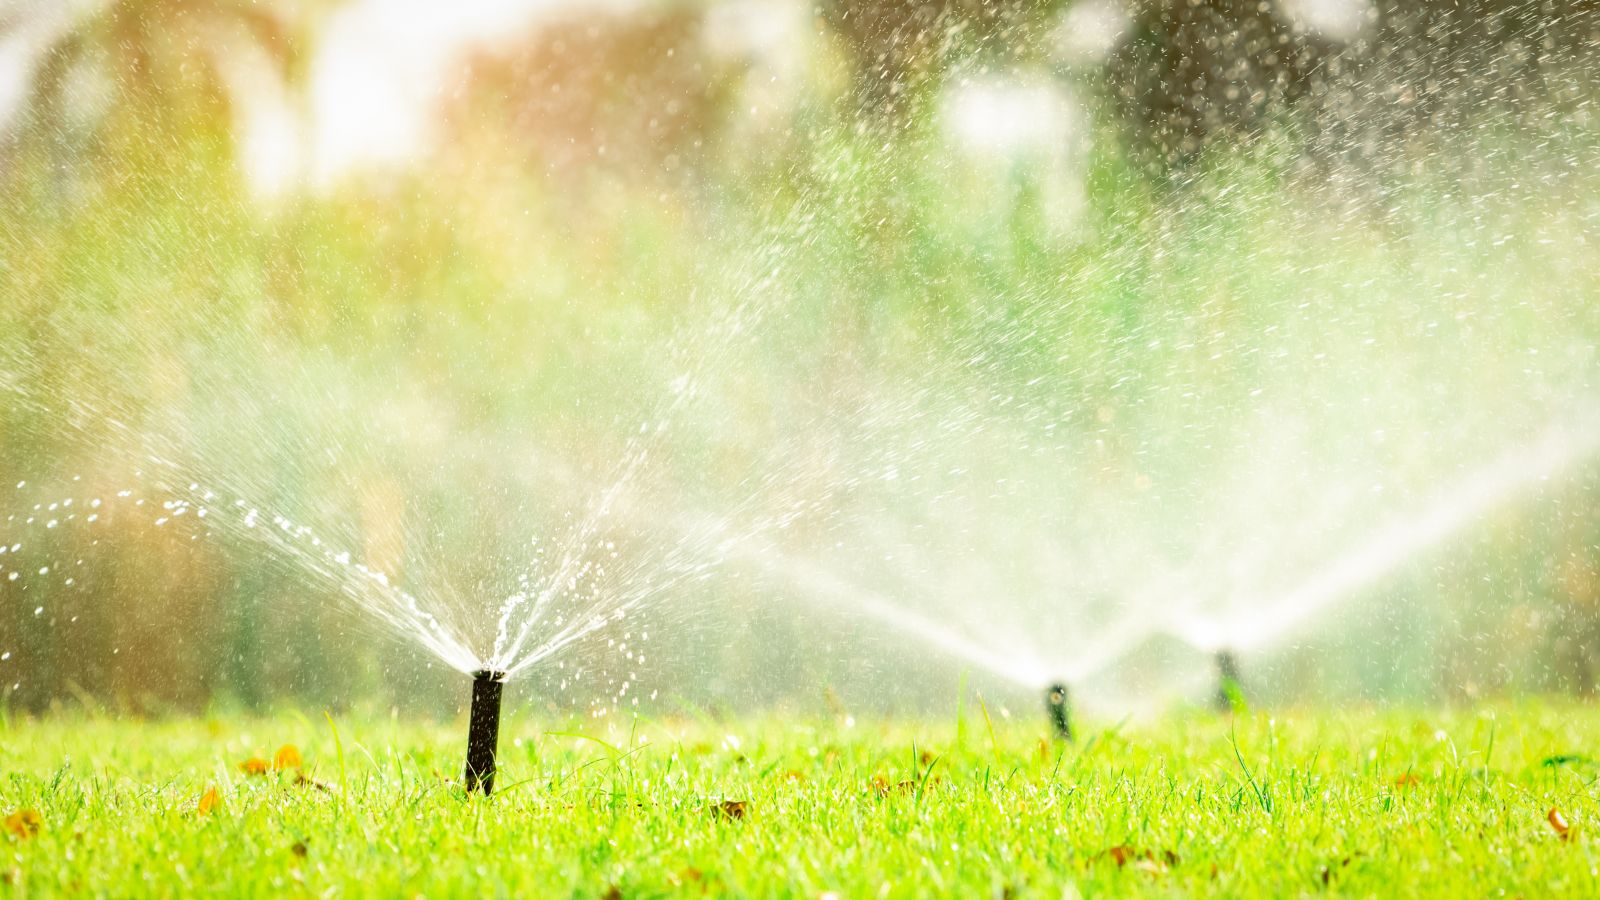 Can landscapers provide a garden irrigation system - bighomeprojects.com